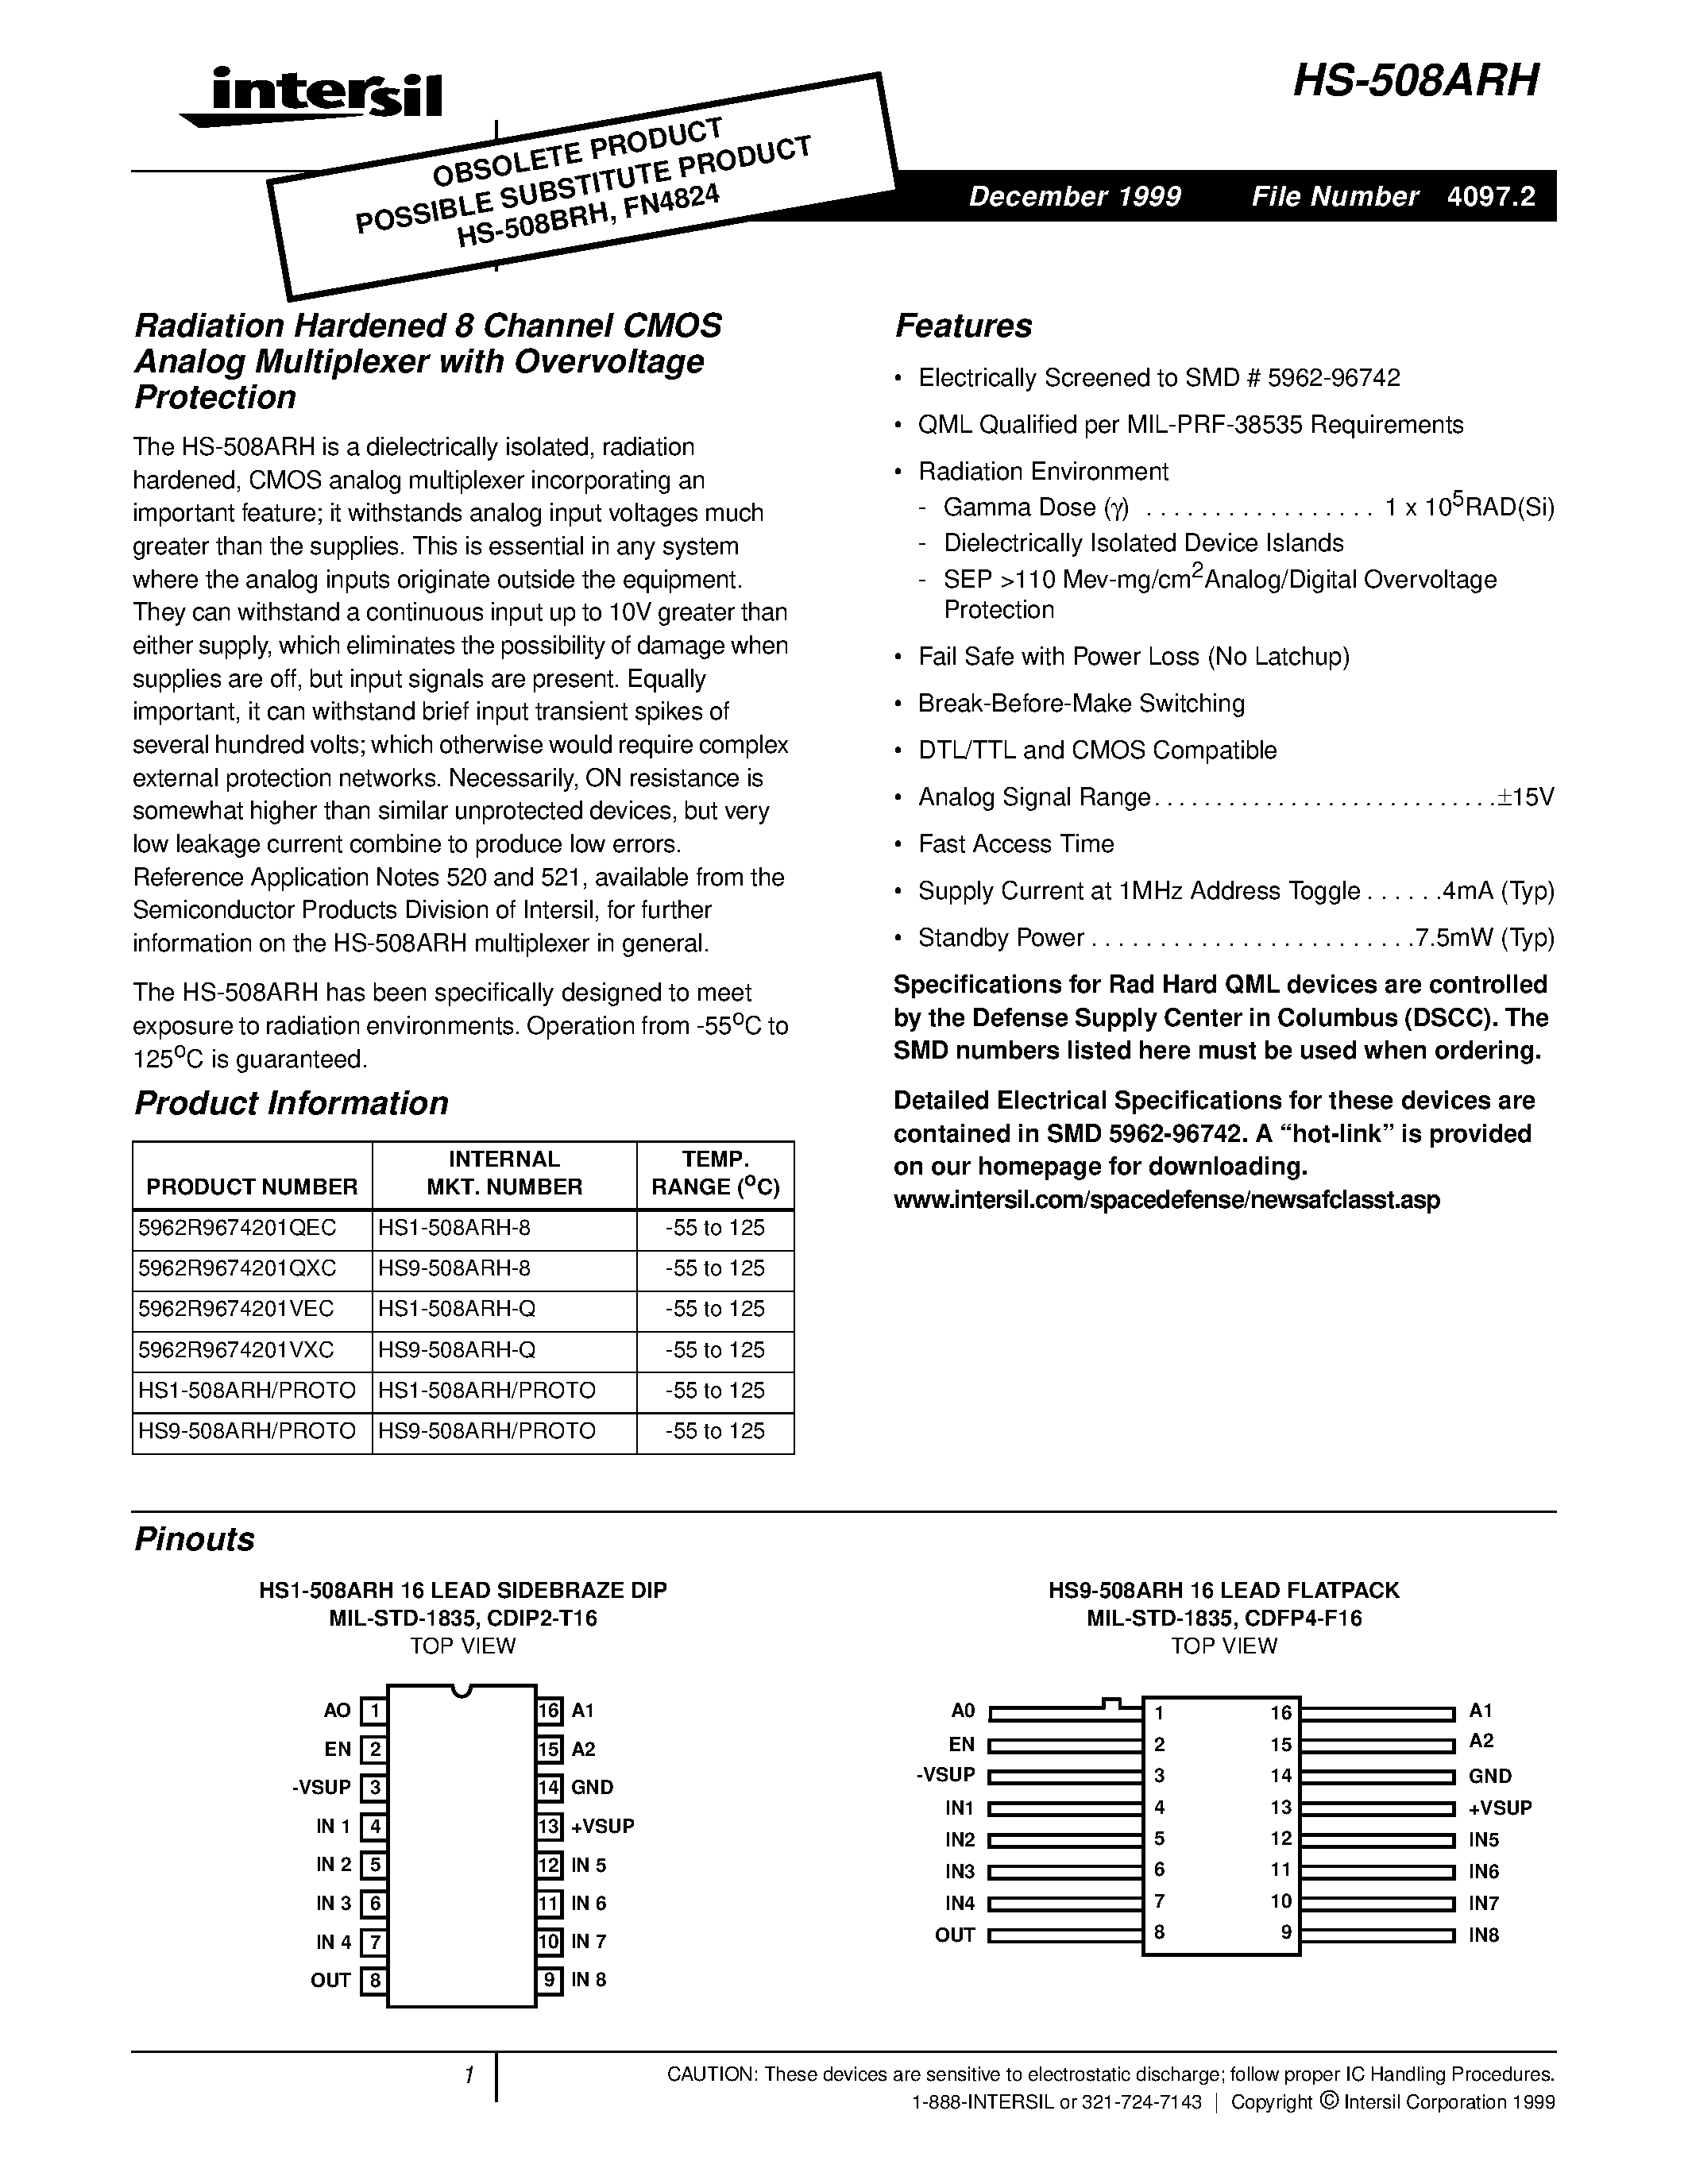 Datasheet HS9-508ARH-8 - Radiation Hardened 8 Channel CMOS Analog Multiplexer with Overvoltage Protection page 1